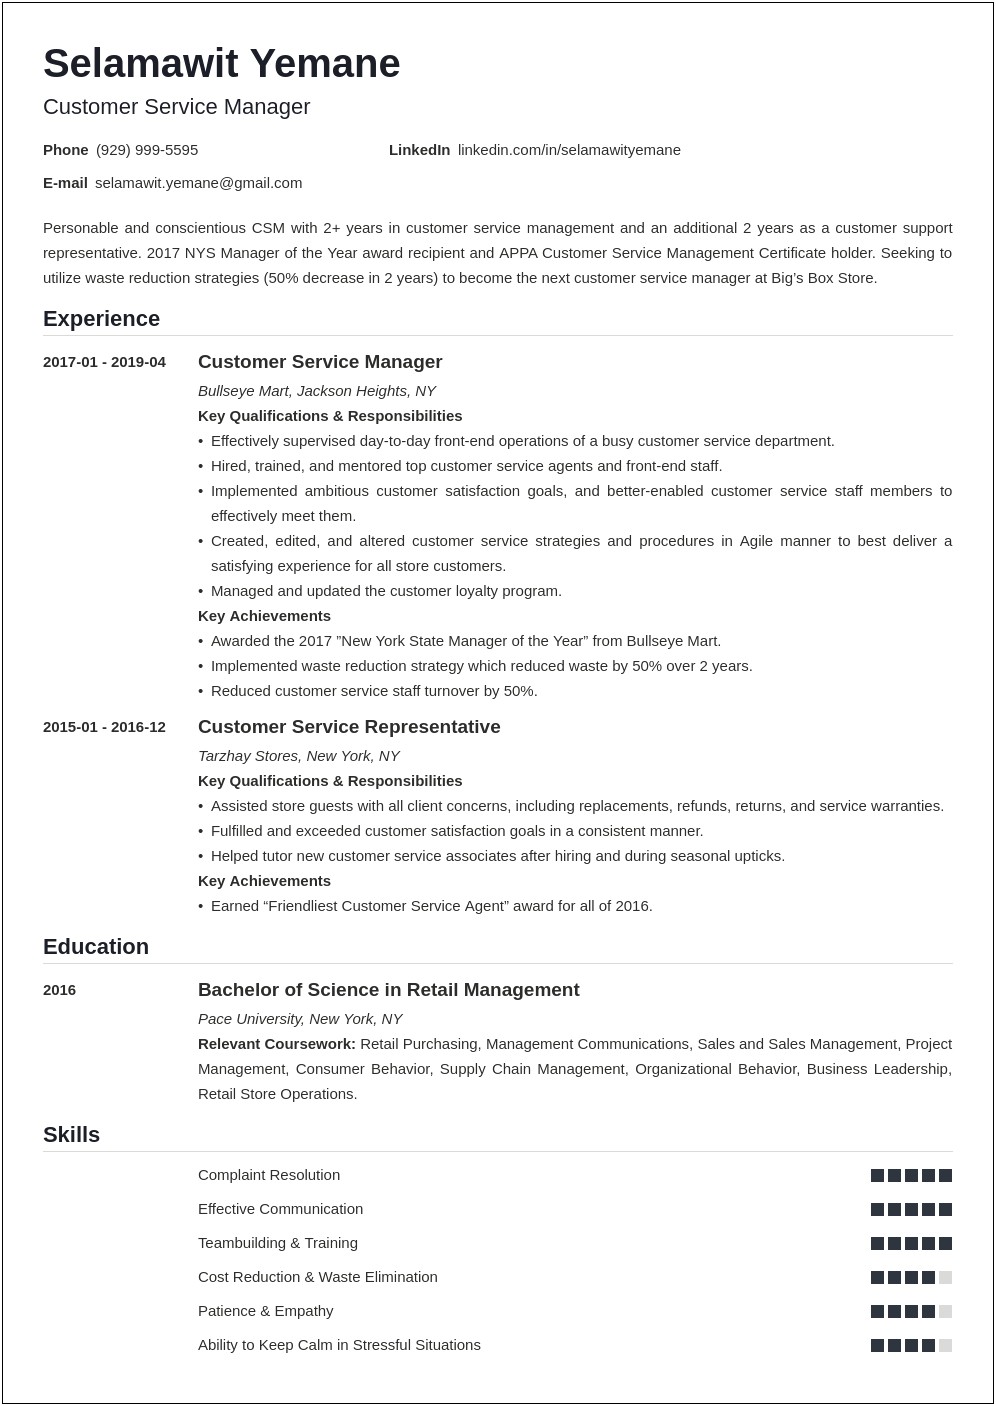 Skills And Abilities List For Customer Service Resume